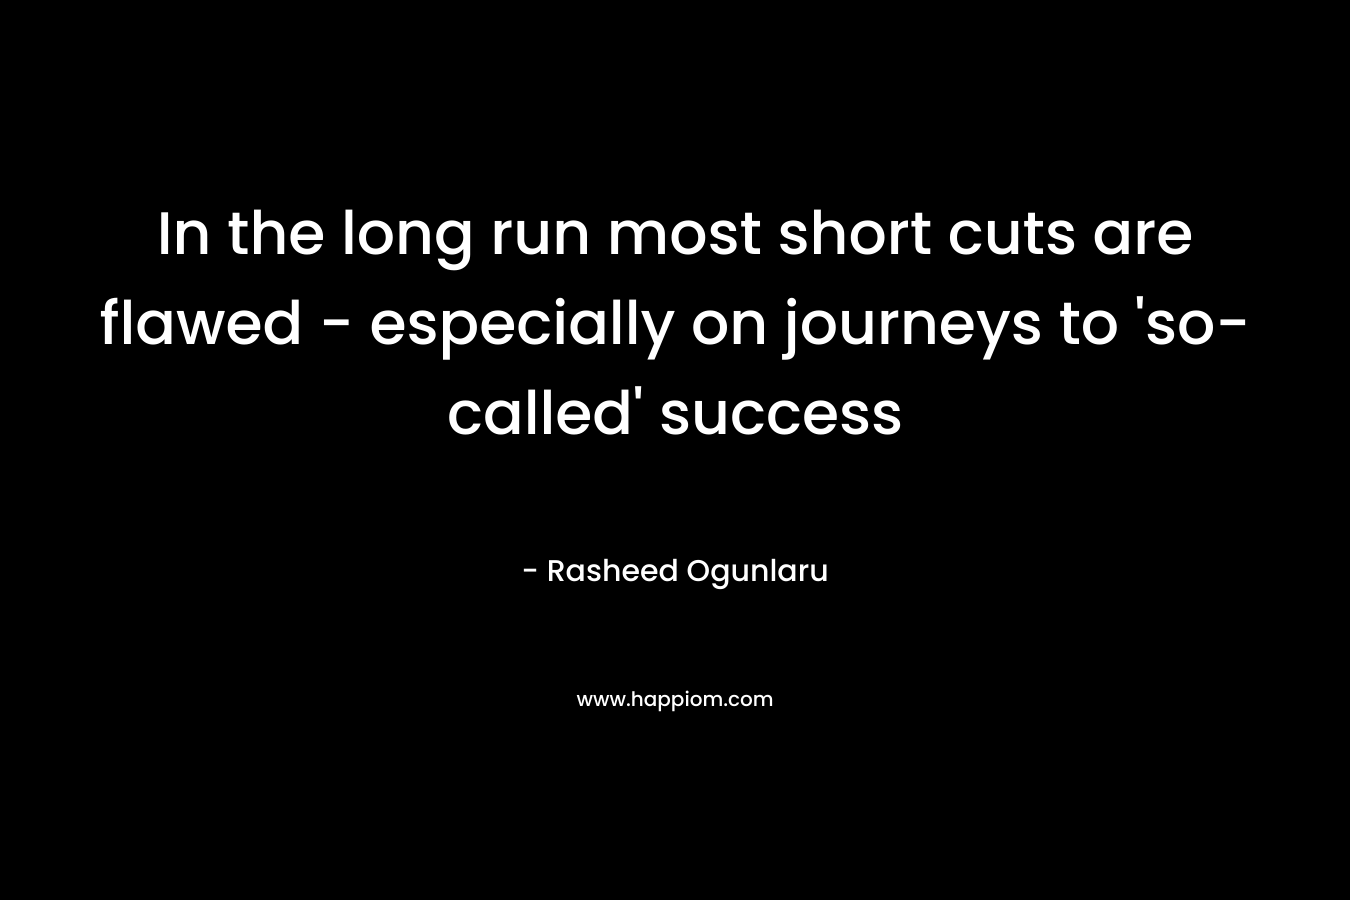 In the long run most short cuts are flawed - especially on journeys to 'so-called' success